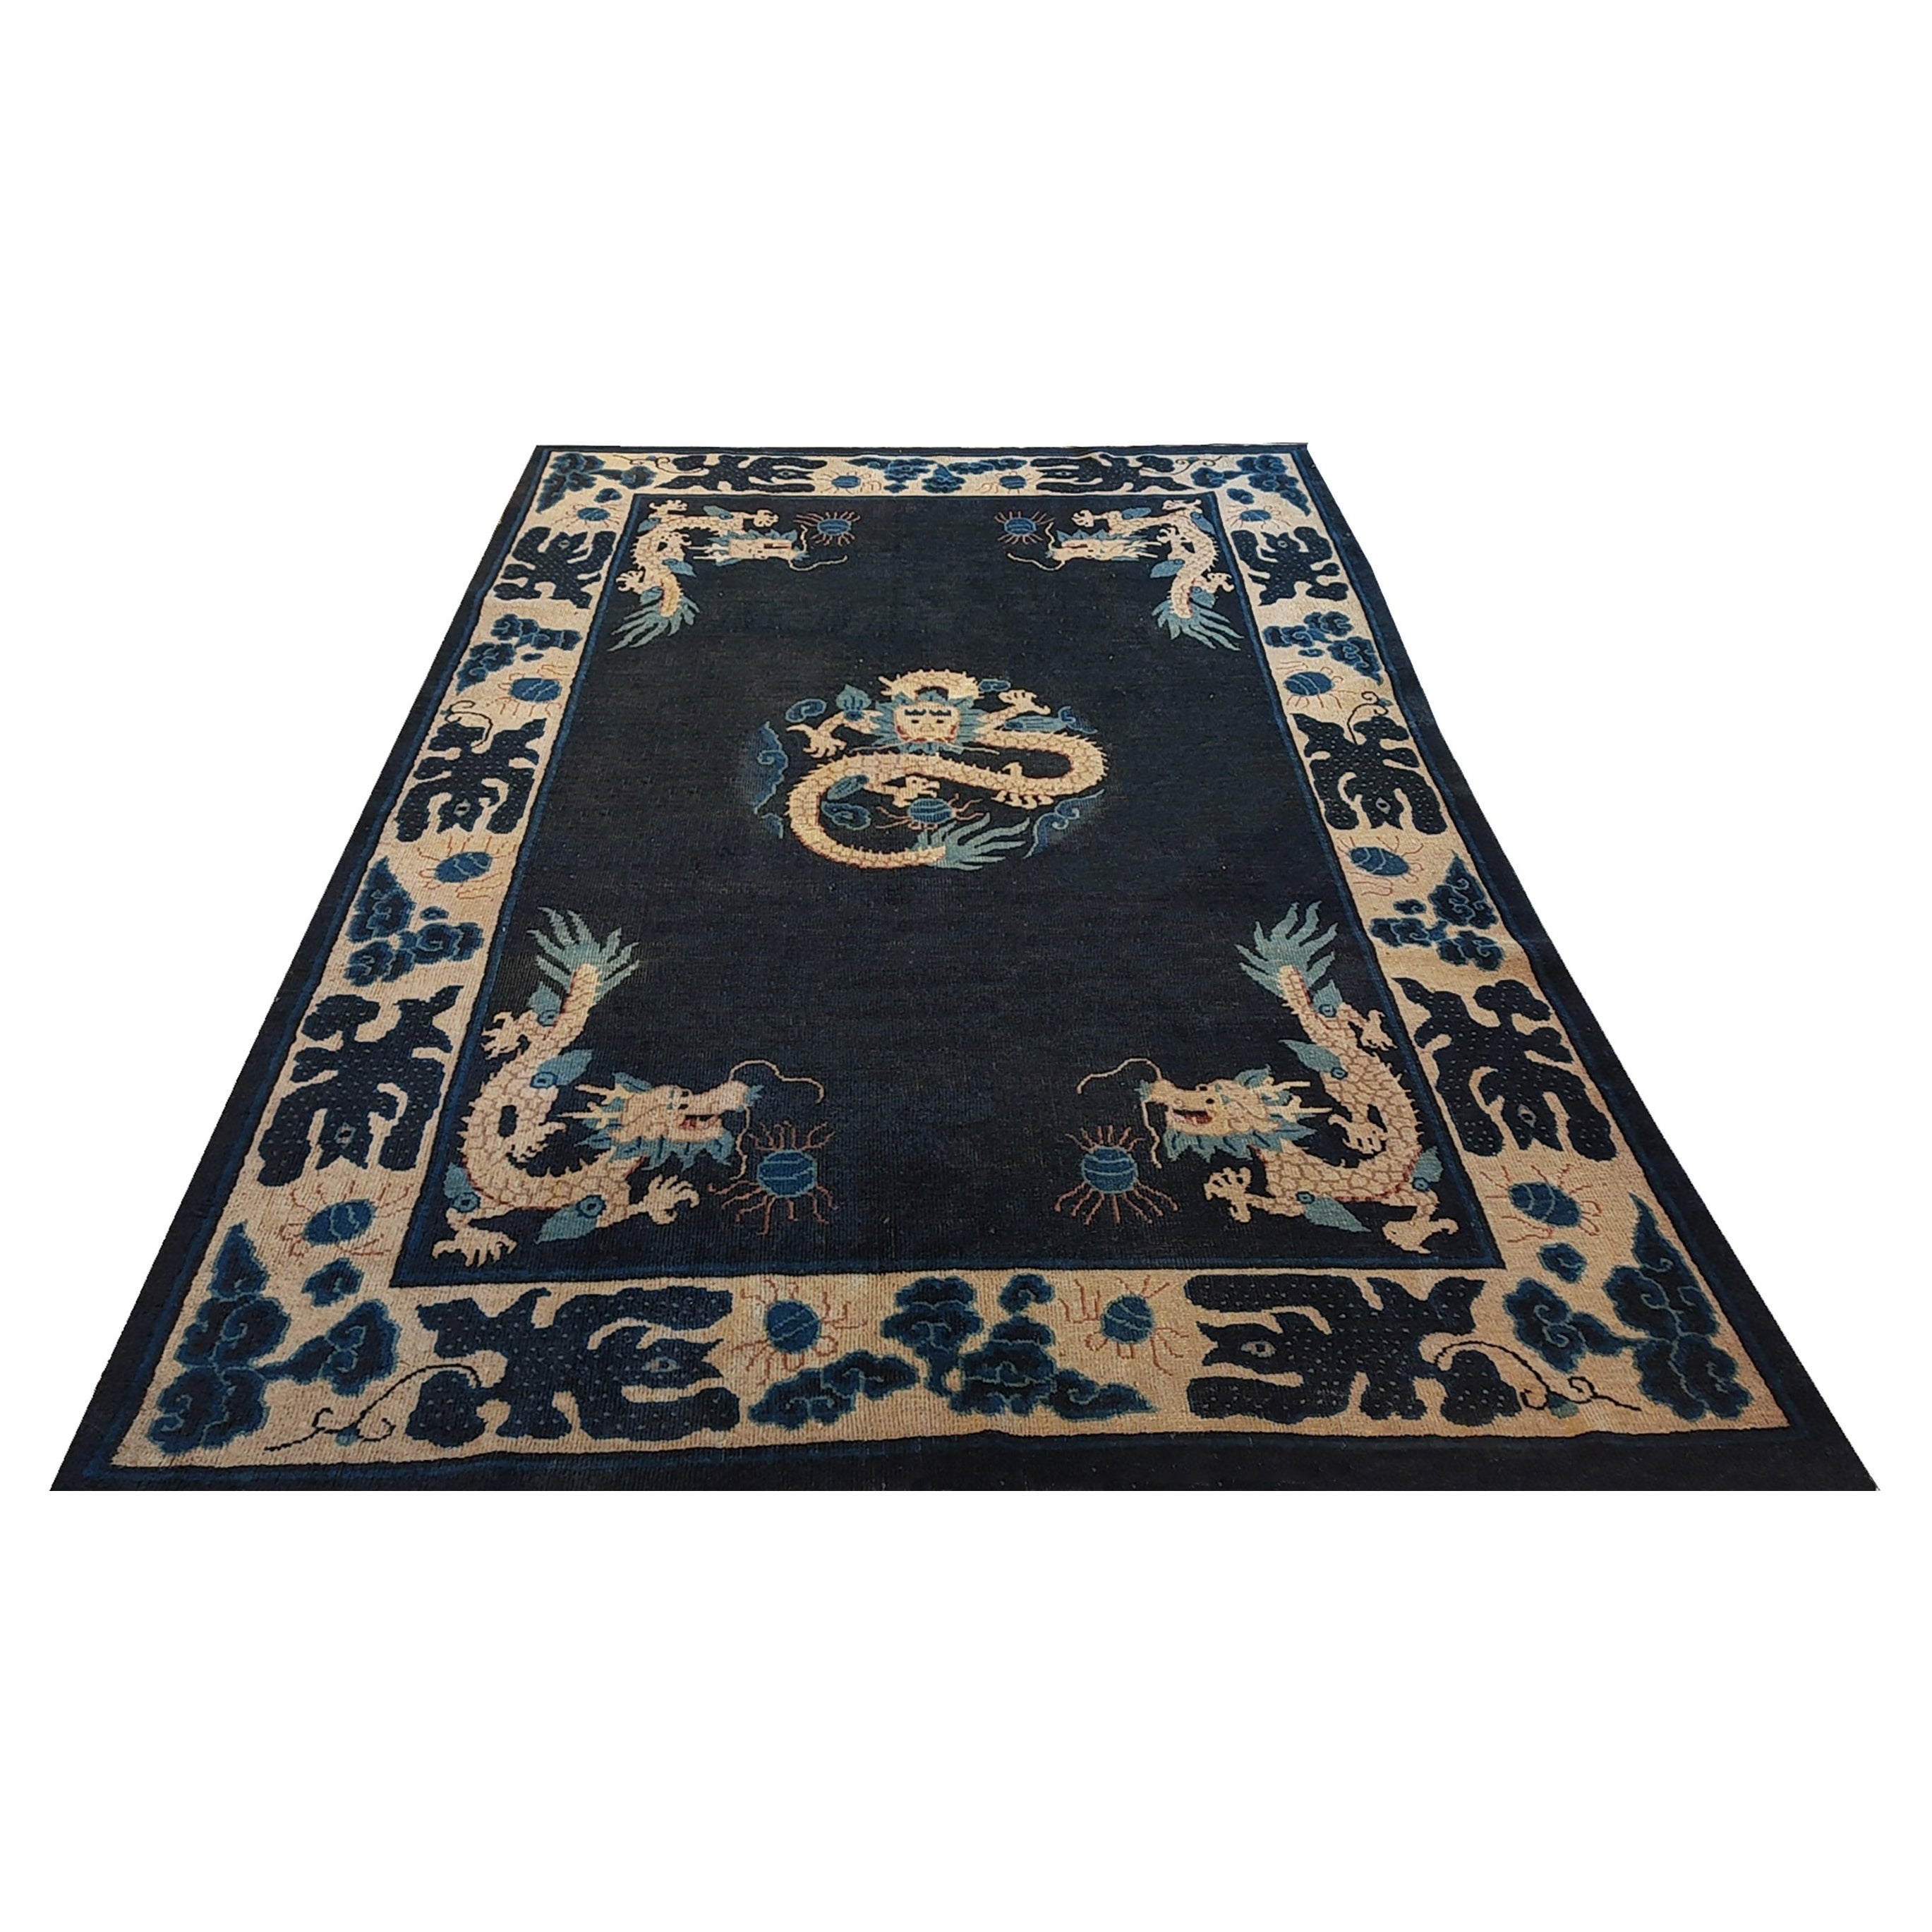 Late 19th Century Chinese Ningxia Dragon Carpet ( 6' x 8' 8'' - 183 x 265 ) For Sale